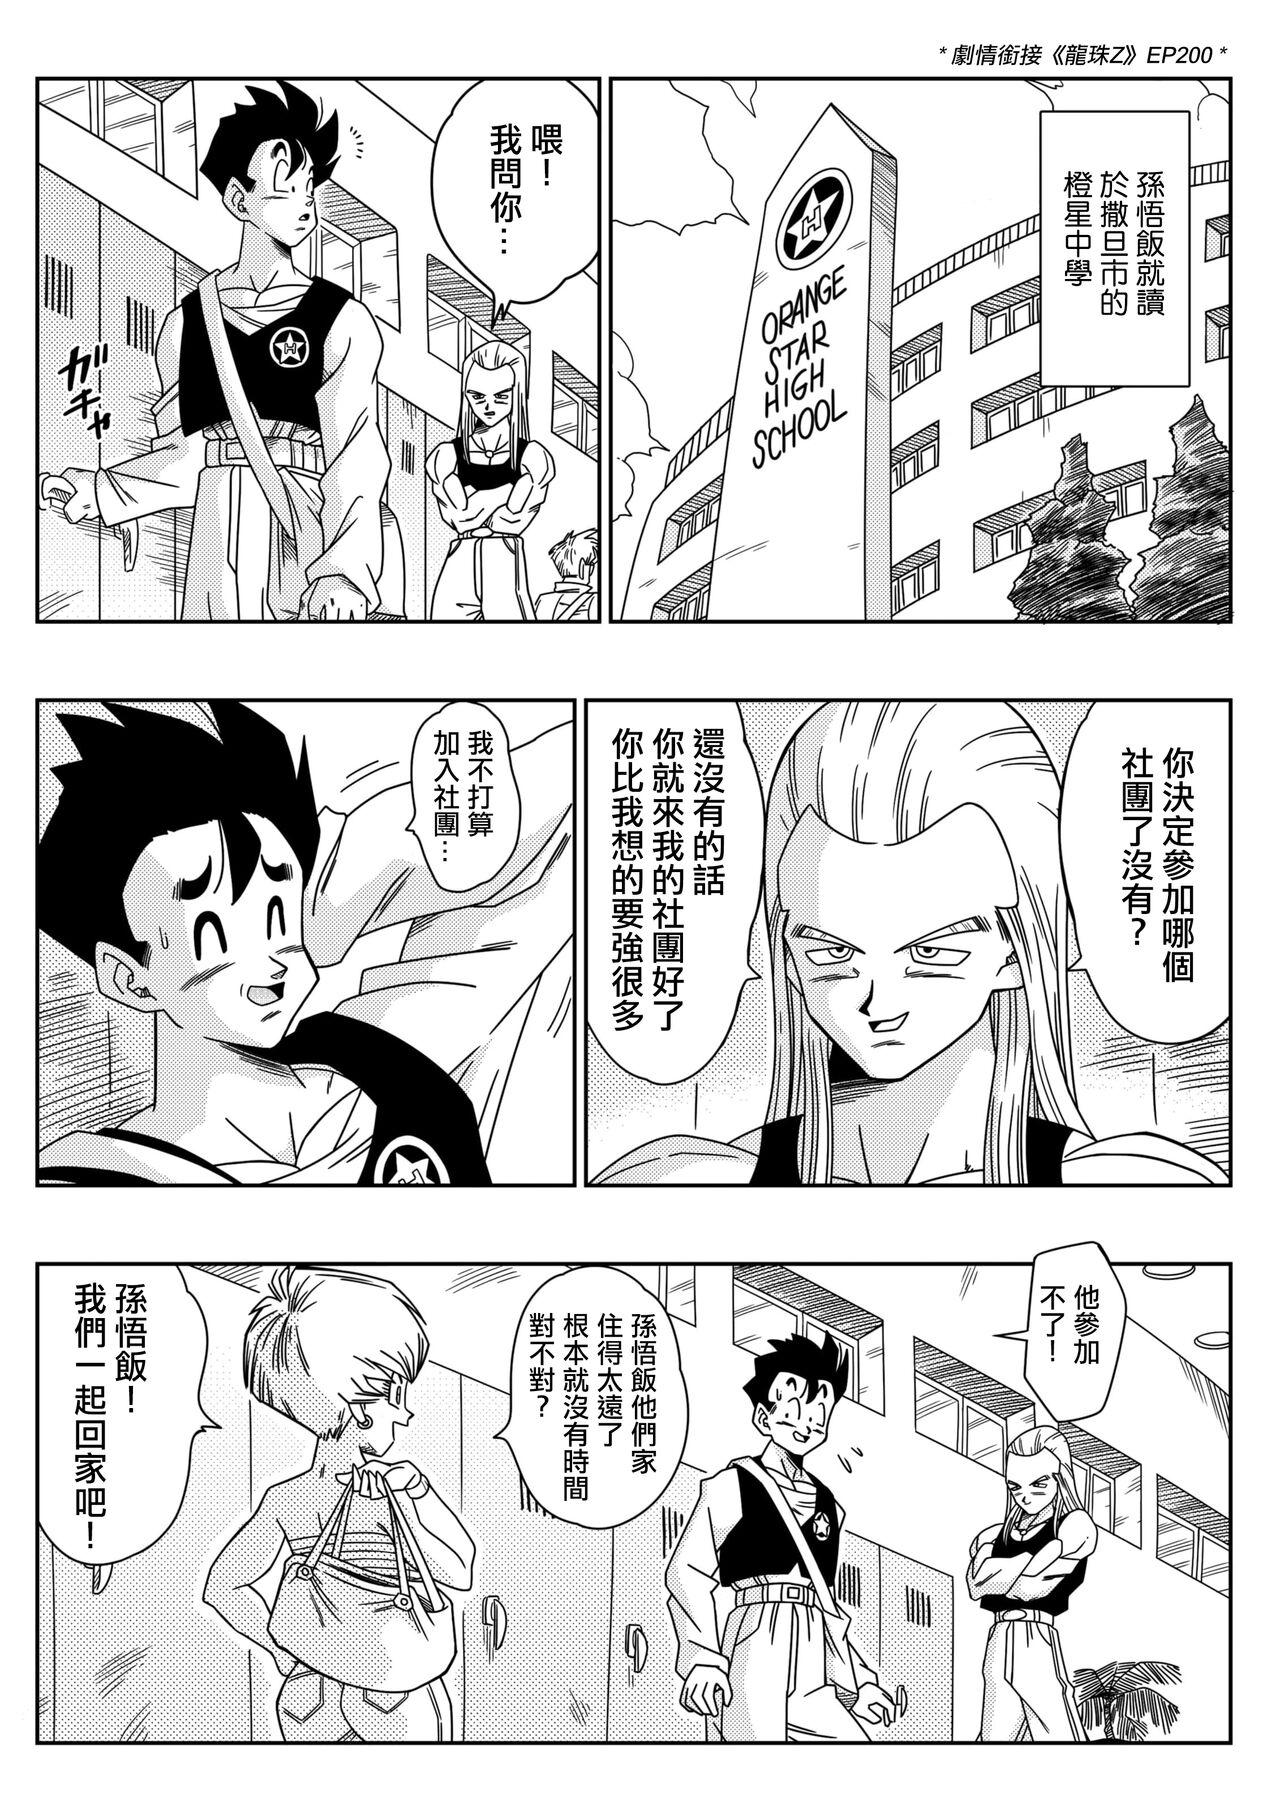 Students LOVE TRIANGLE Z PART 1 - Dragon ball z Amateurs - Page 3